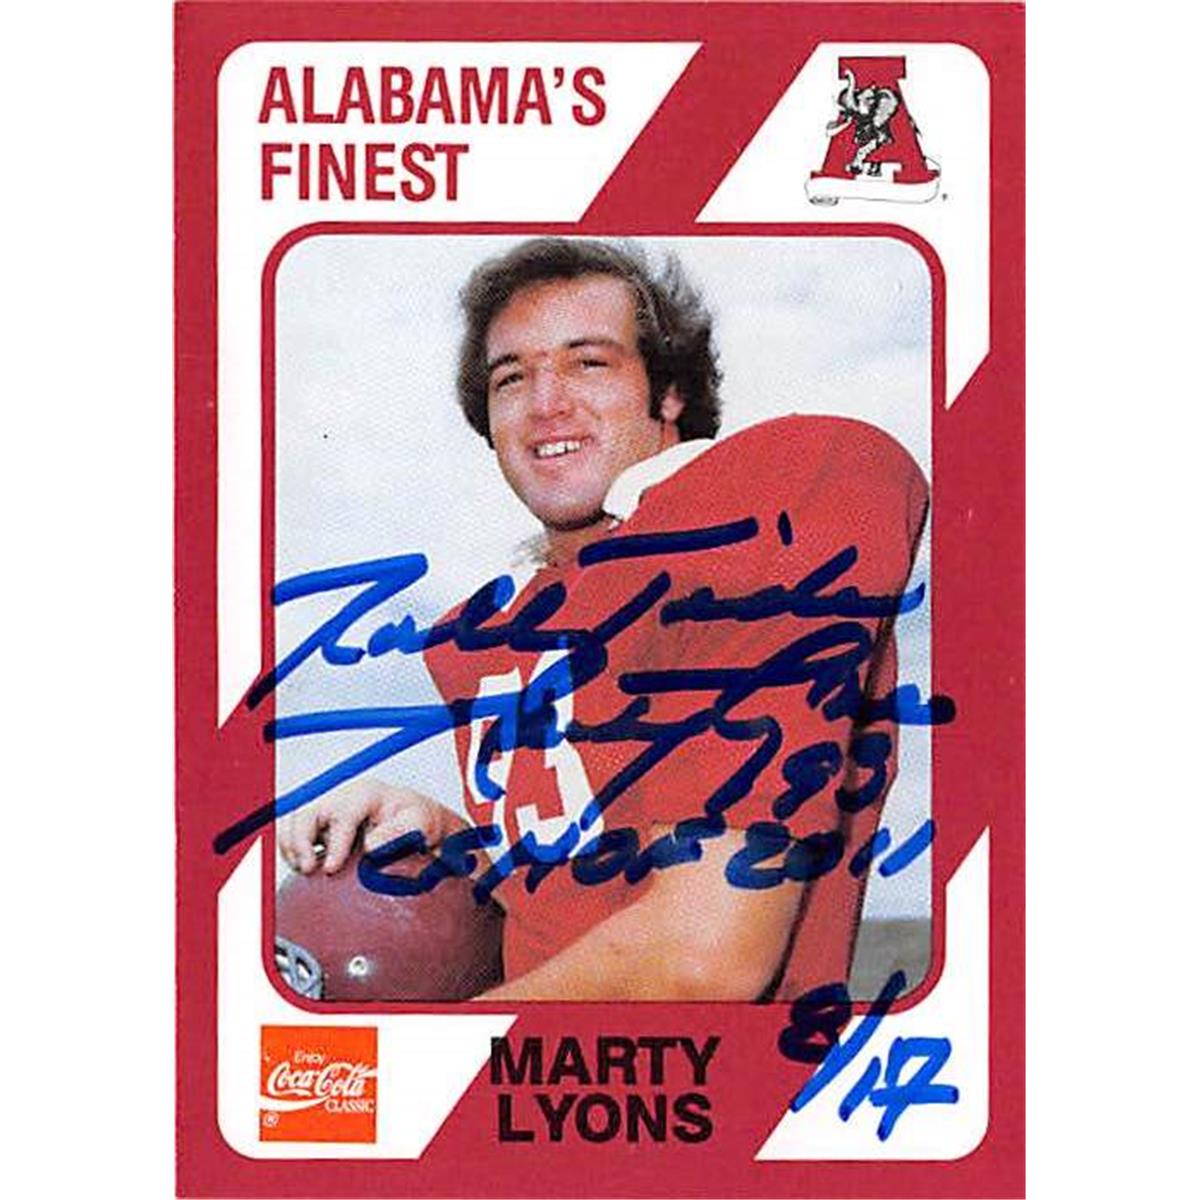 Picture of Autograph Warehouse 345132 Marty Lyons Autographed Football Card - Alabama Crimson Tide 1989 College Collection No.59 Inscribed Roll Tide CFHOF 2011